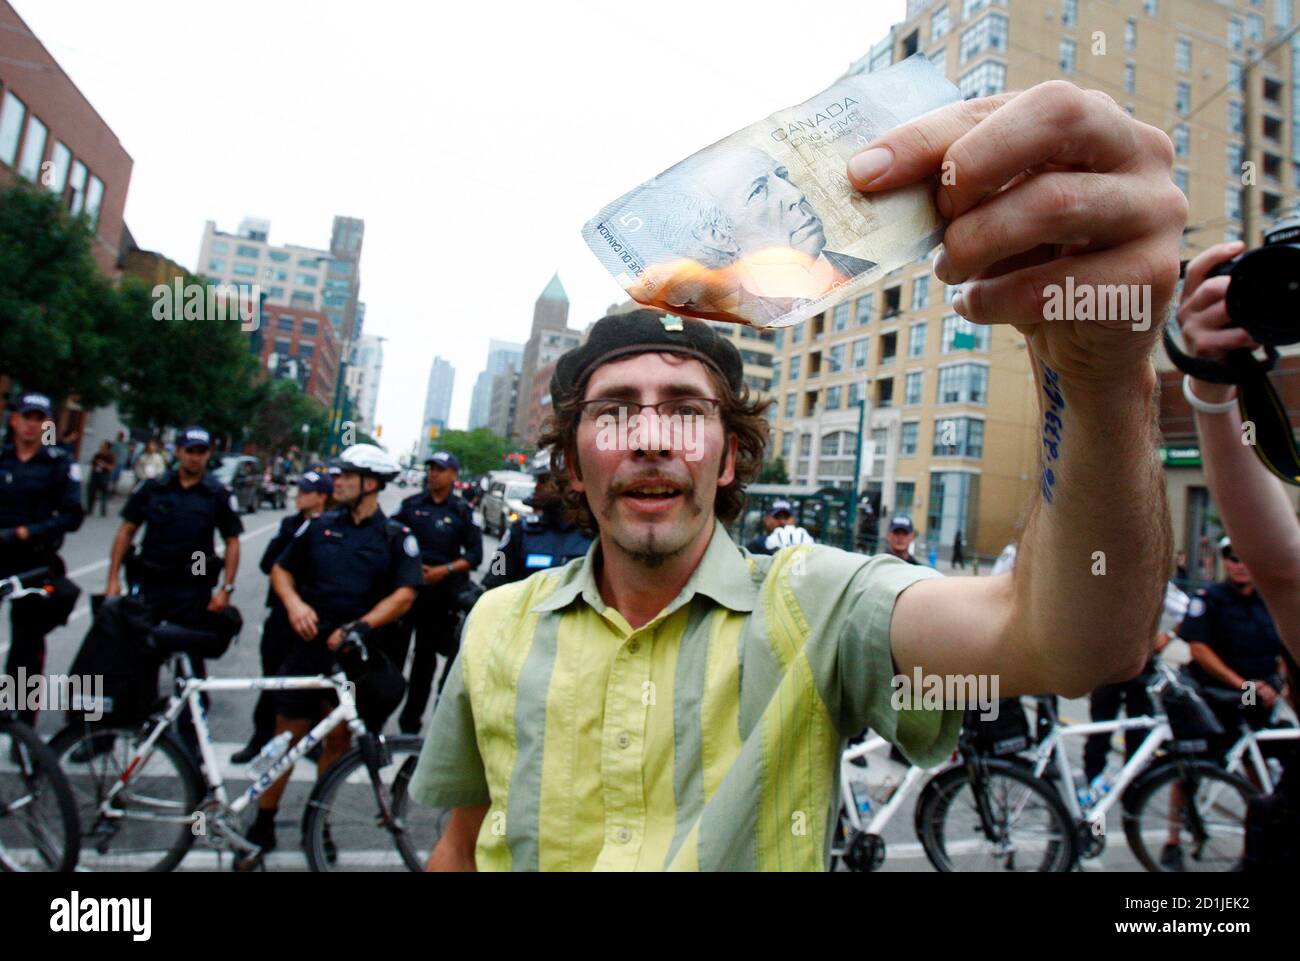 A man burns a Canadian five-dollar note during a protest at the G20 summit in Toronto June 27, 2010. Police in Toronto fired tear gas on protesters for a second straight day on Monday as new violence surrounding the G20 summit erupted and the arrest tally climbed toward 600. REUTERS/Christinne Muschi (CANADA - Tags: POLITICS CIVIL UNREST IMAGES OF THE DAY BUSINESS) Stock Photo